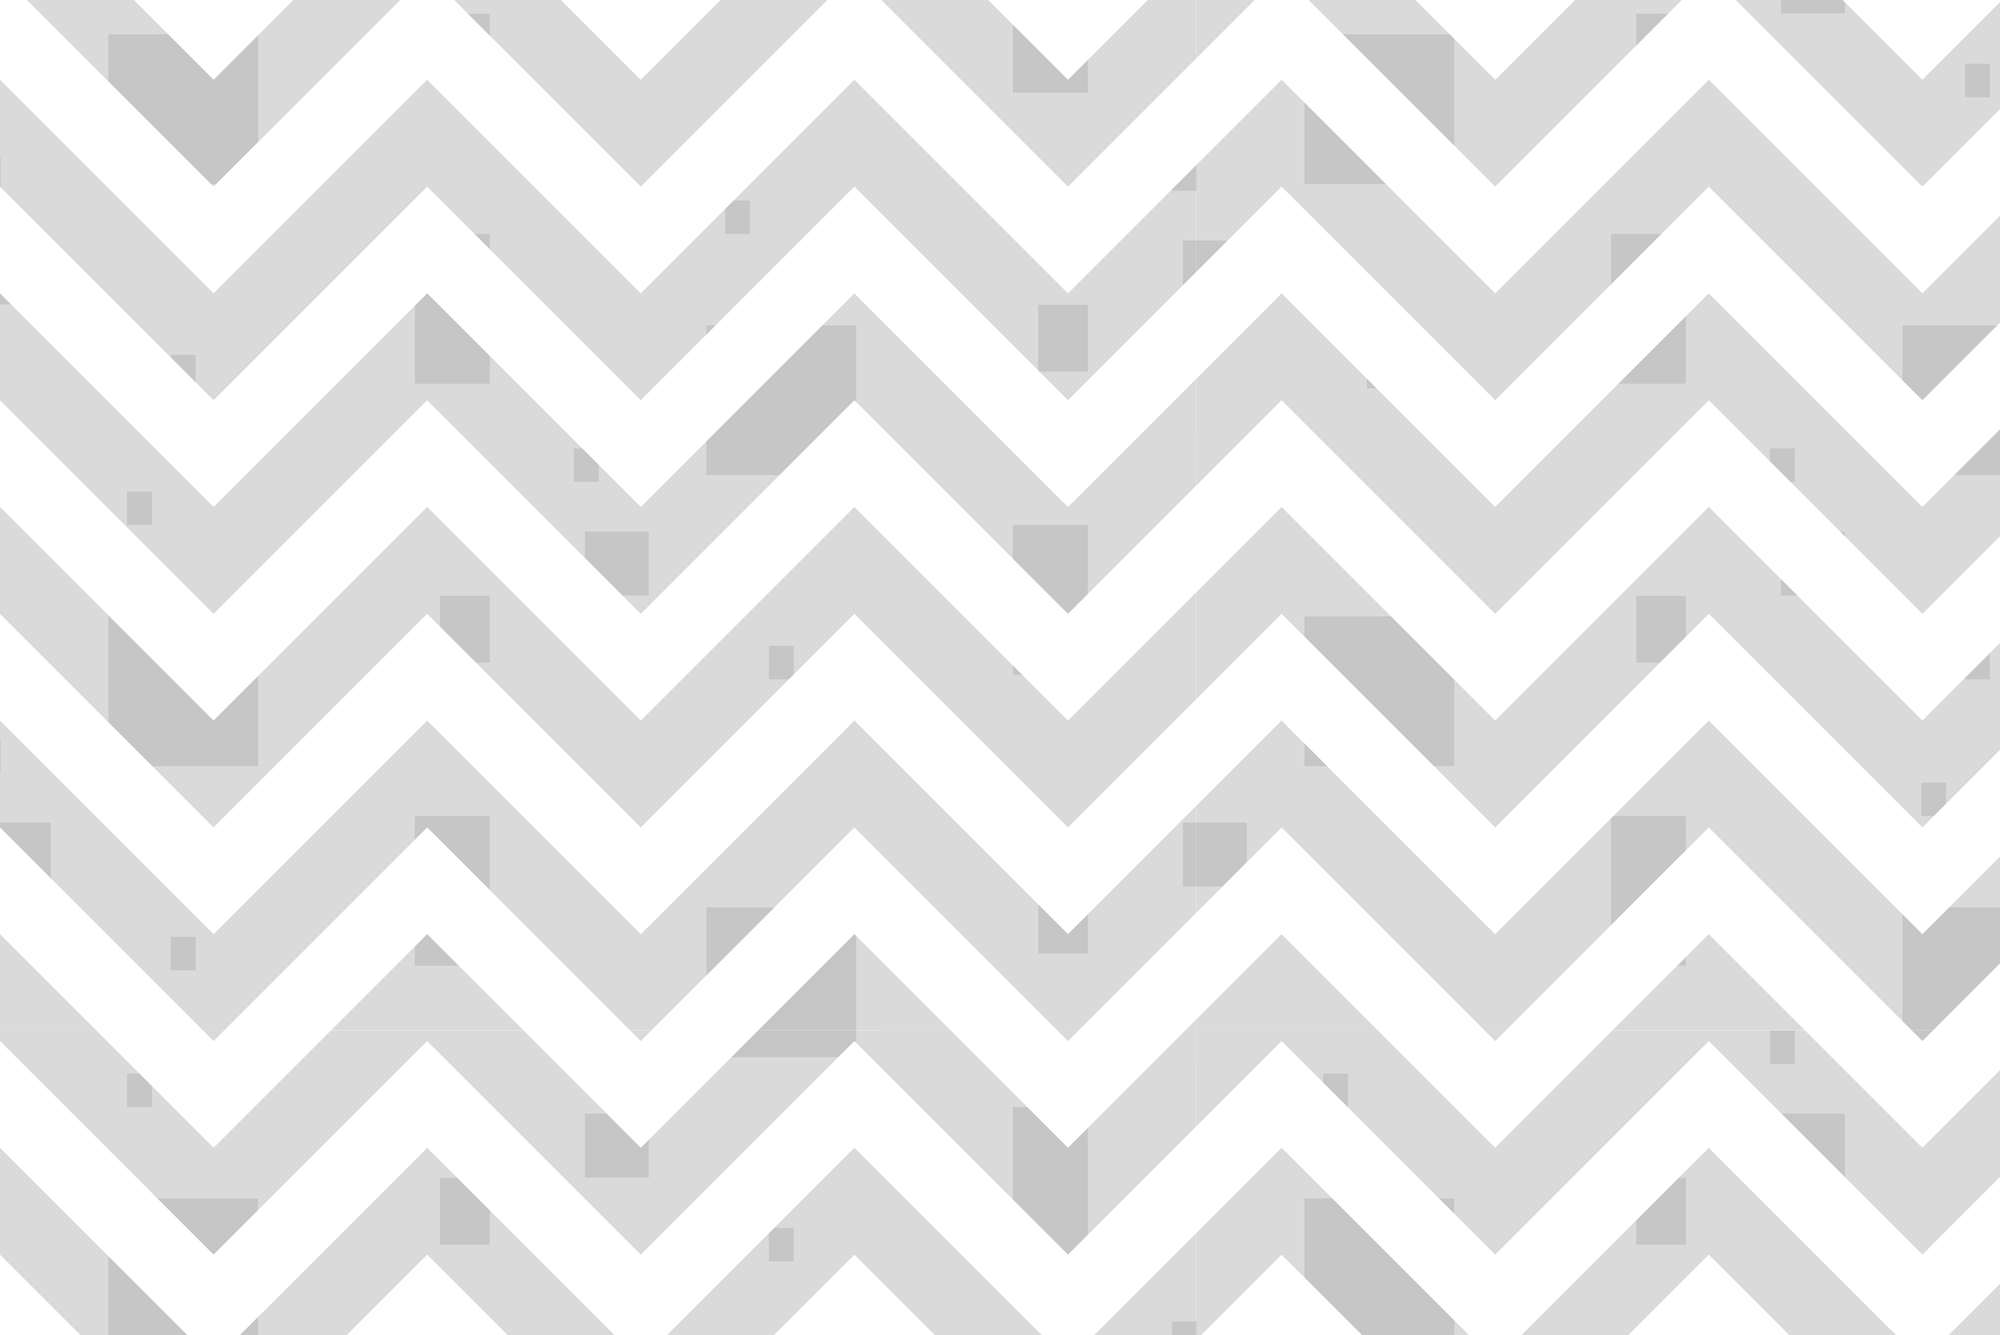             Design wall mural zig zag pattern with small squares grey on matte smooth non-woven
        